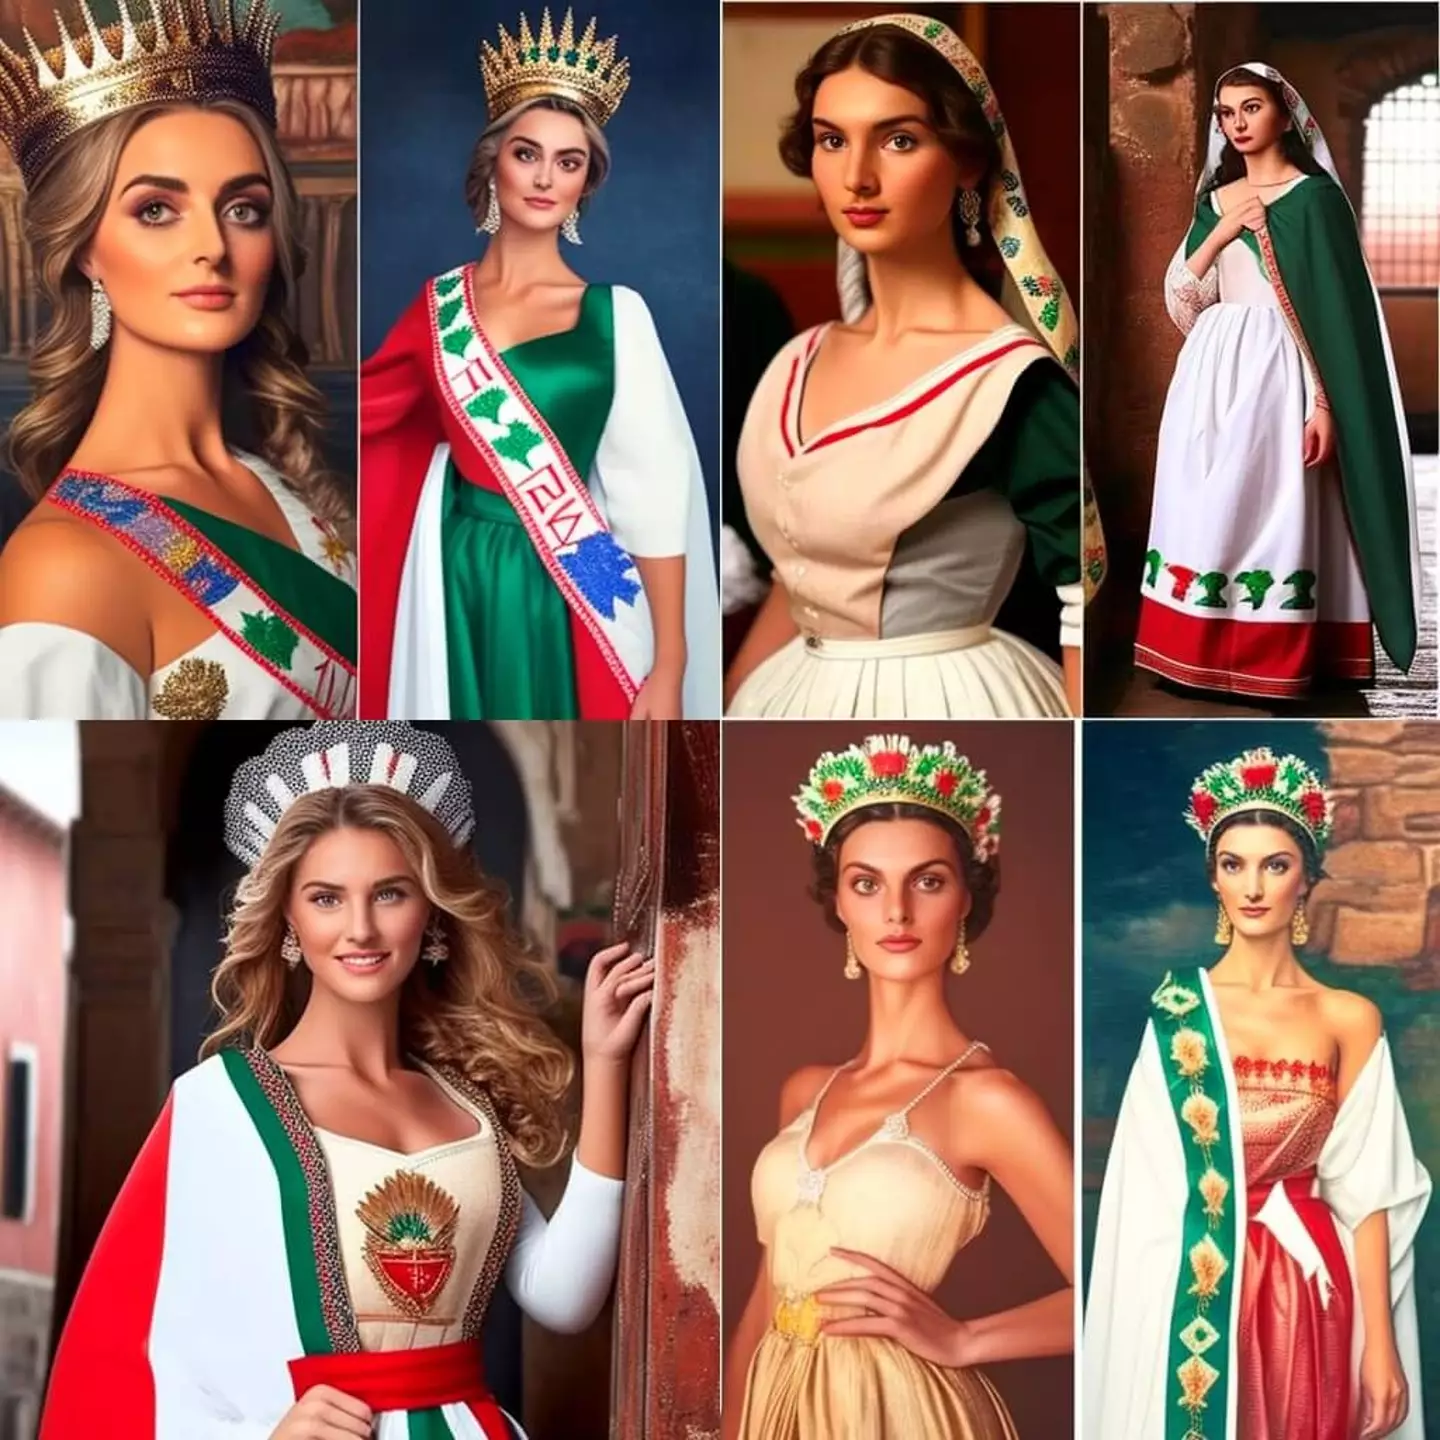 Crowns and wearable flags seem to be an AI's idea of the 'ideal' woman.